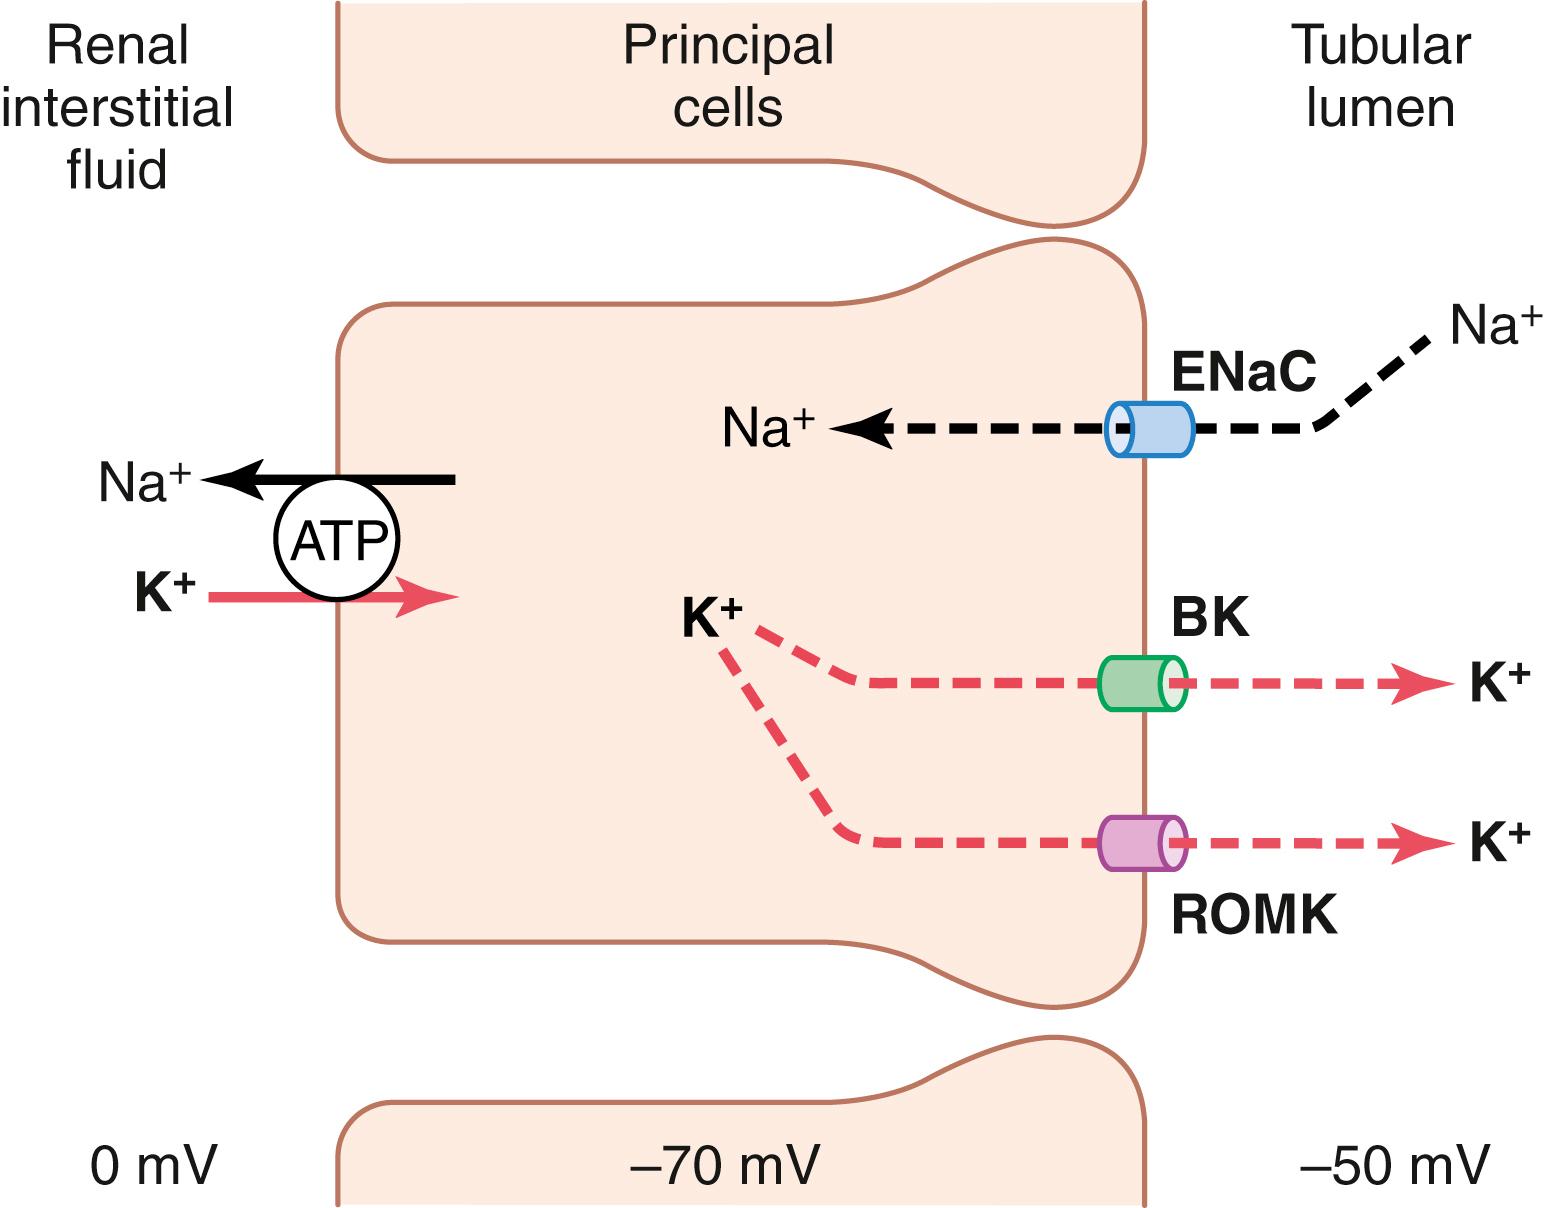 Figure 30-3, Mechanisms of potassium secretion and sodium reabsorption by the principal cells of the late distal and collecting tubules. BK, “big” potassium channel; ENaC, epithelial sodium channel; ROMK, renal outer medullary potassium channel.